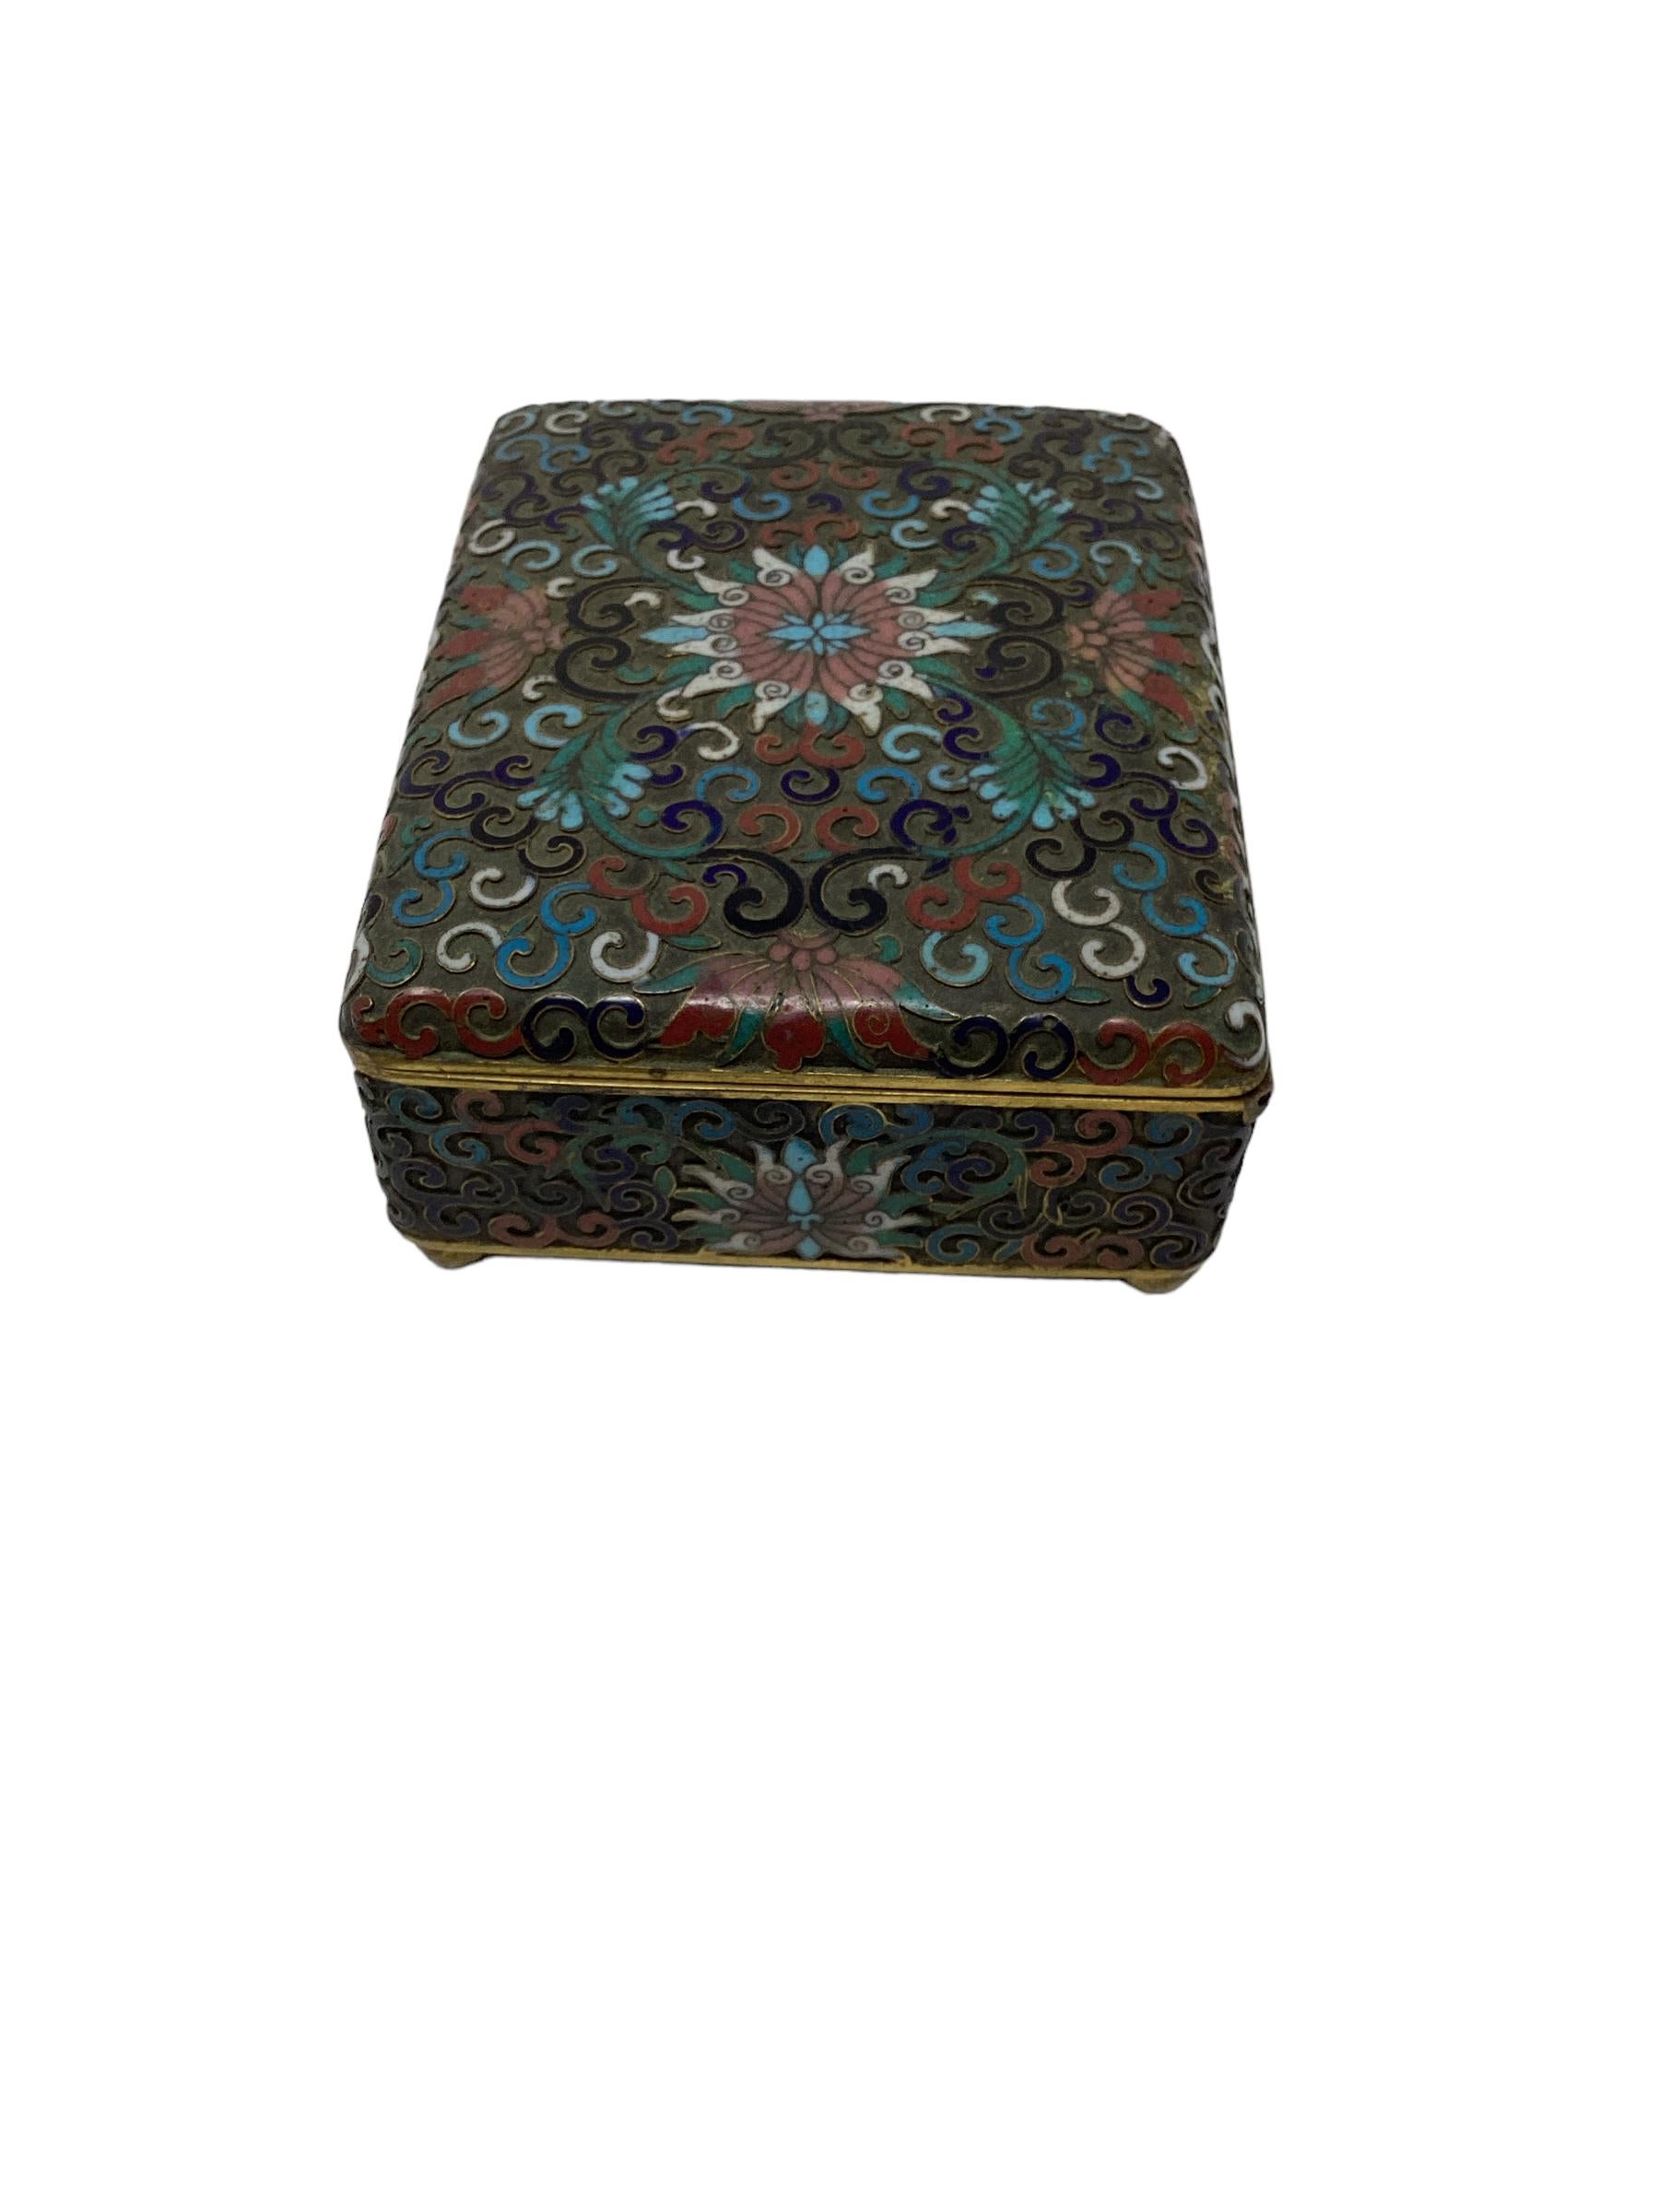 Chinese Export Cloisonné Box In Good Condition For Sale In Chapel Hill, NC